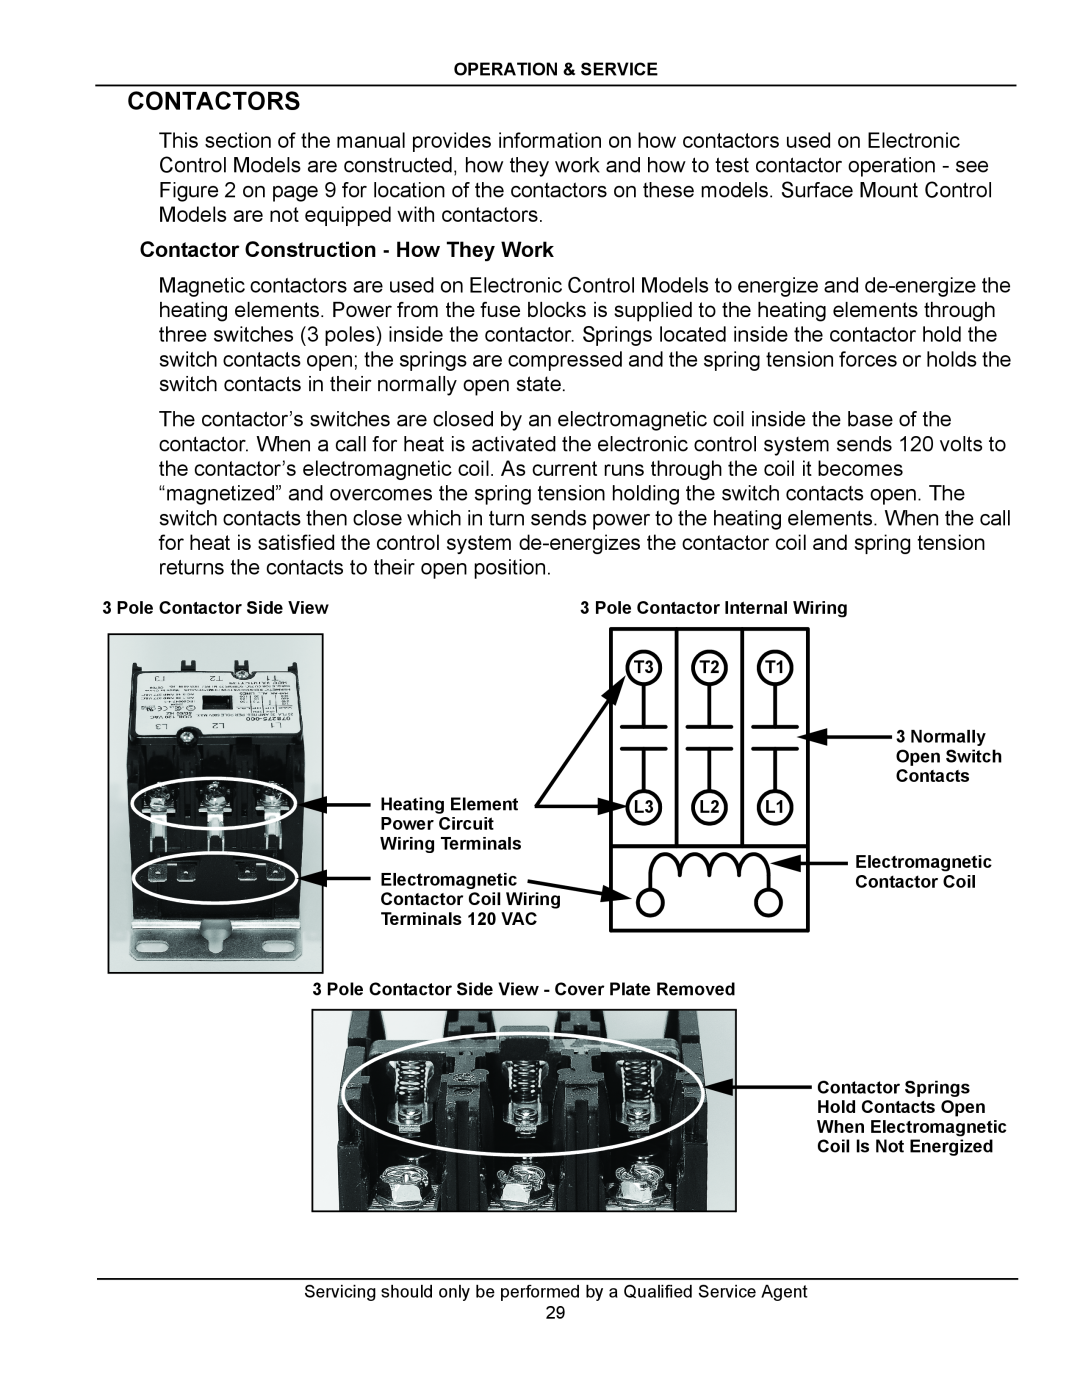 American Water Heater ITCE3-52/80/119, STCE3-52/80/119 manual Contactors, Contactor Construction - How They Work 